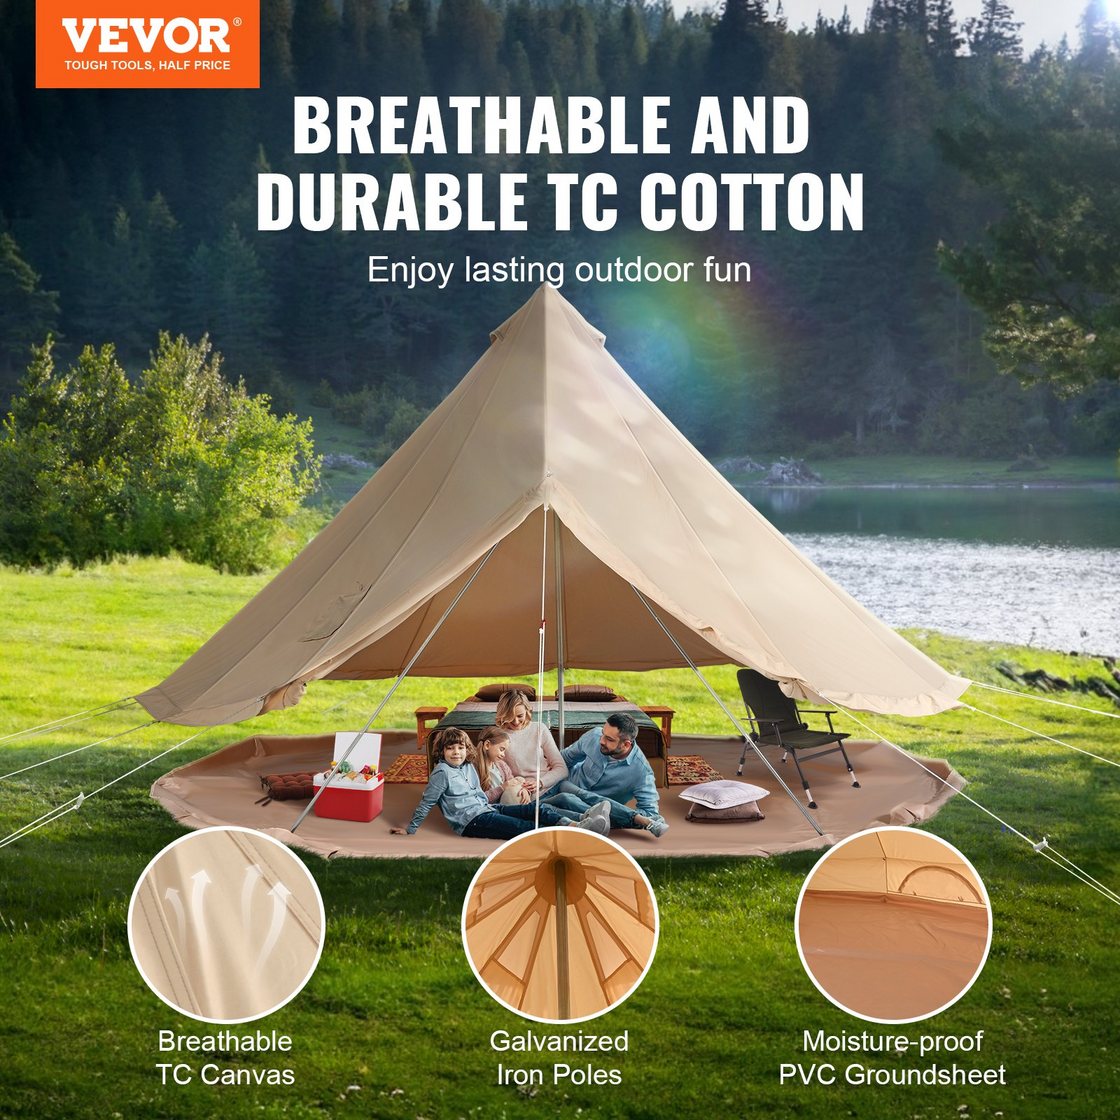 VEVOR Canvas Bell Tent - 6 m/19.68 ft Yurt Tent for Camping with Stove Jack